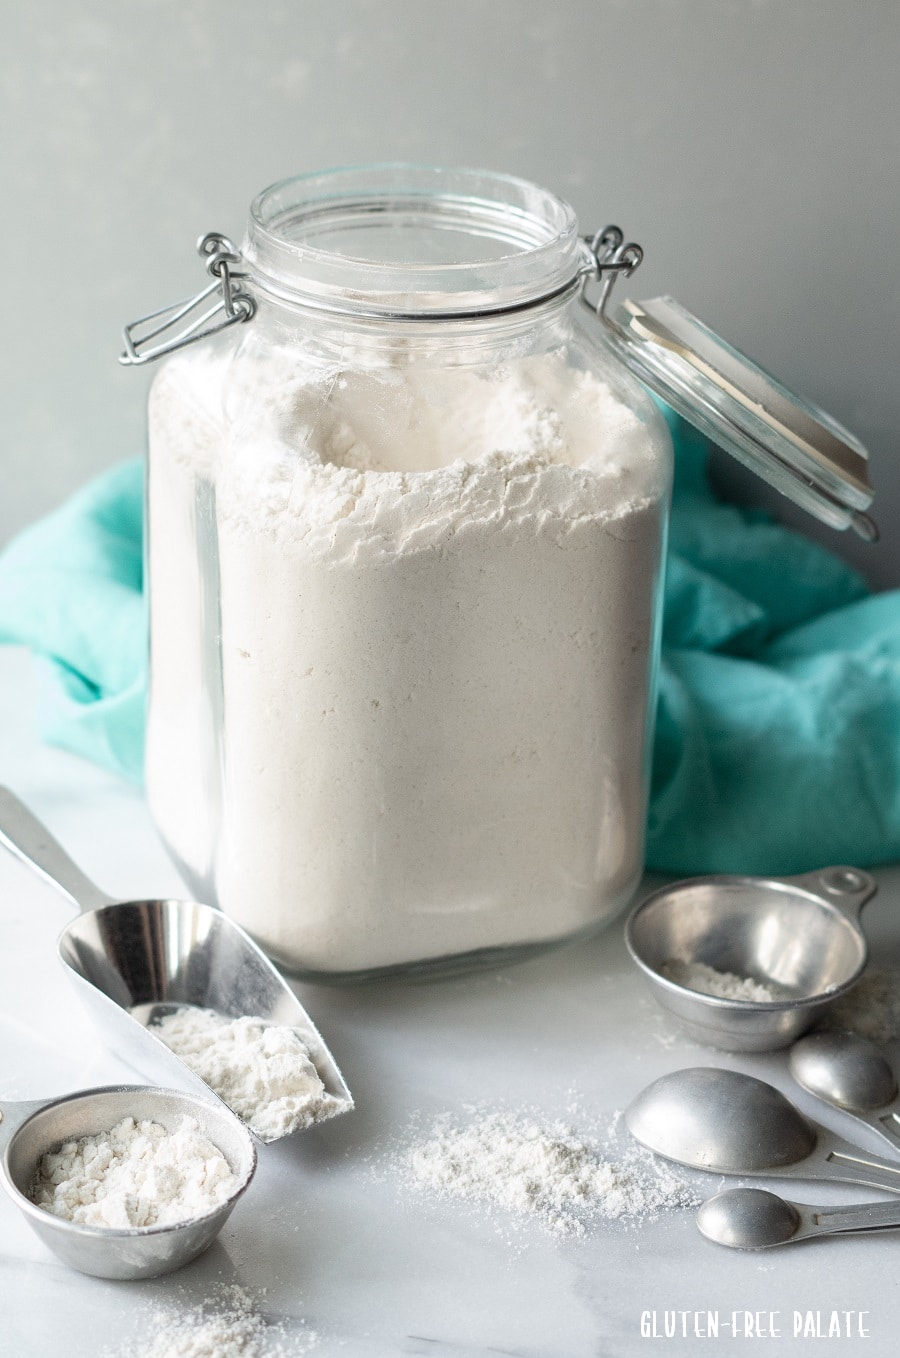 a close up of a jar of gluten free flour next to measuring cups and meauring spoons